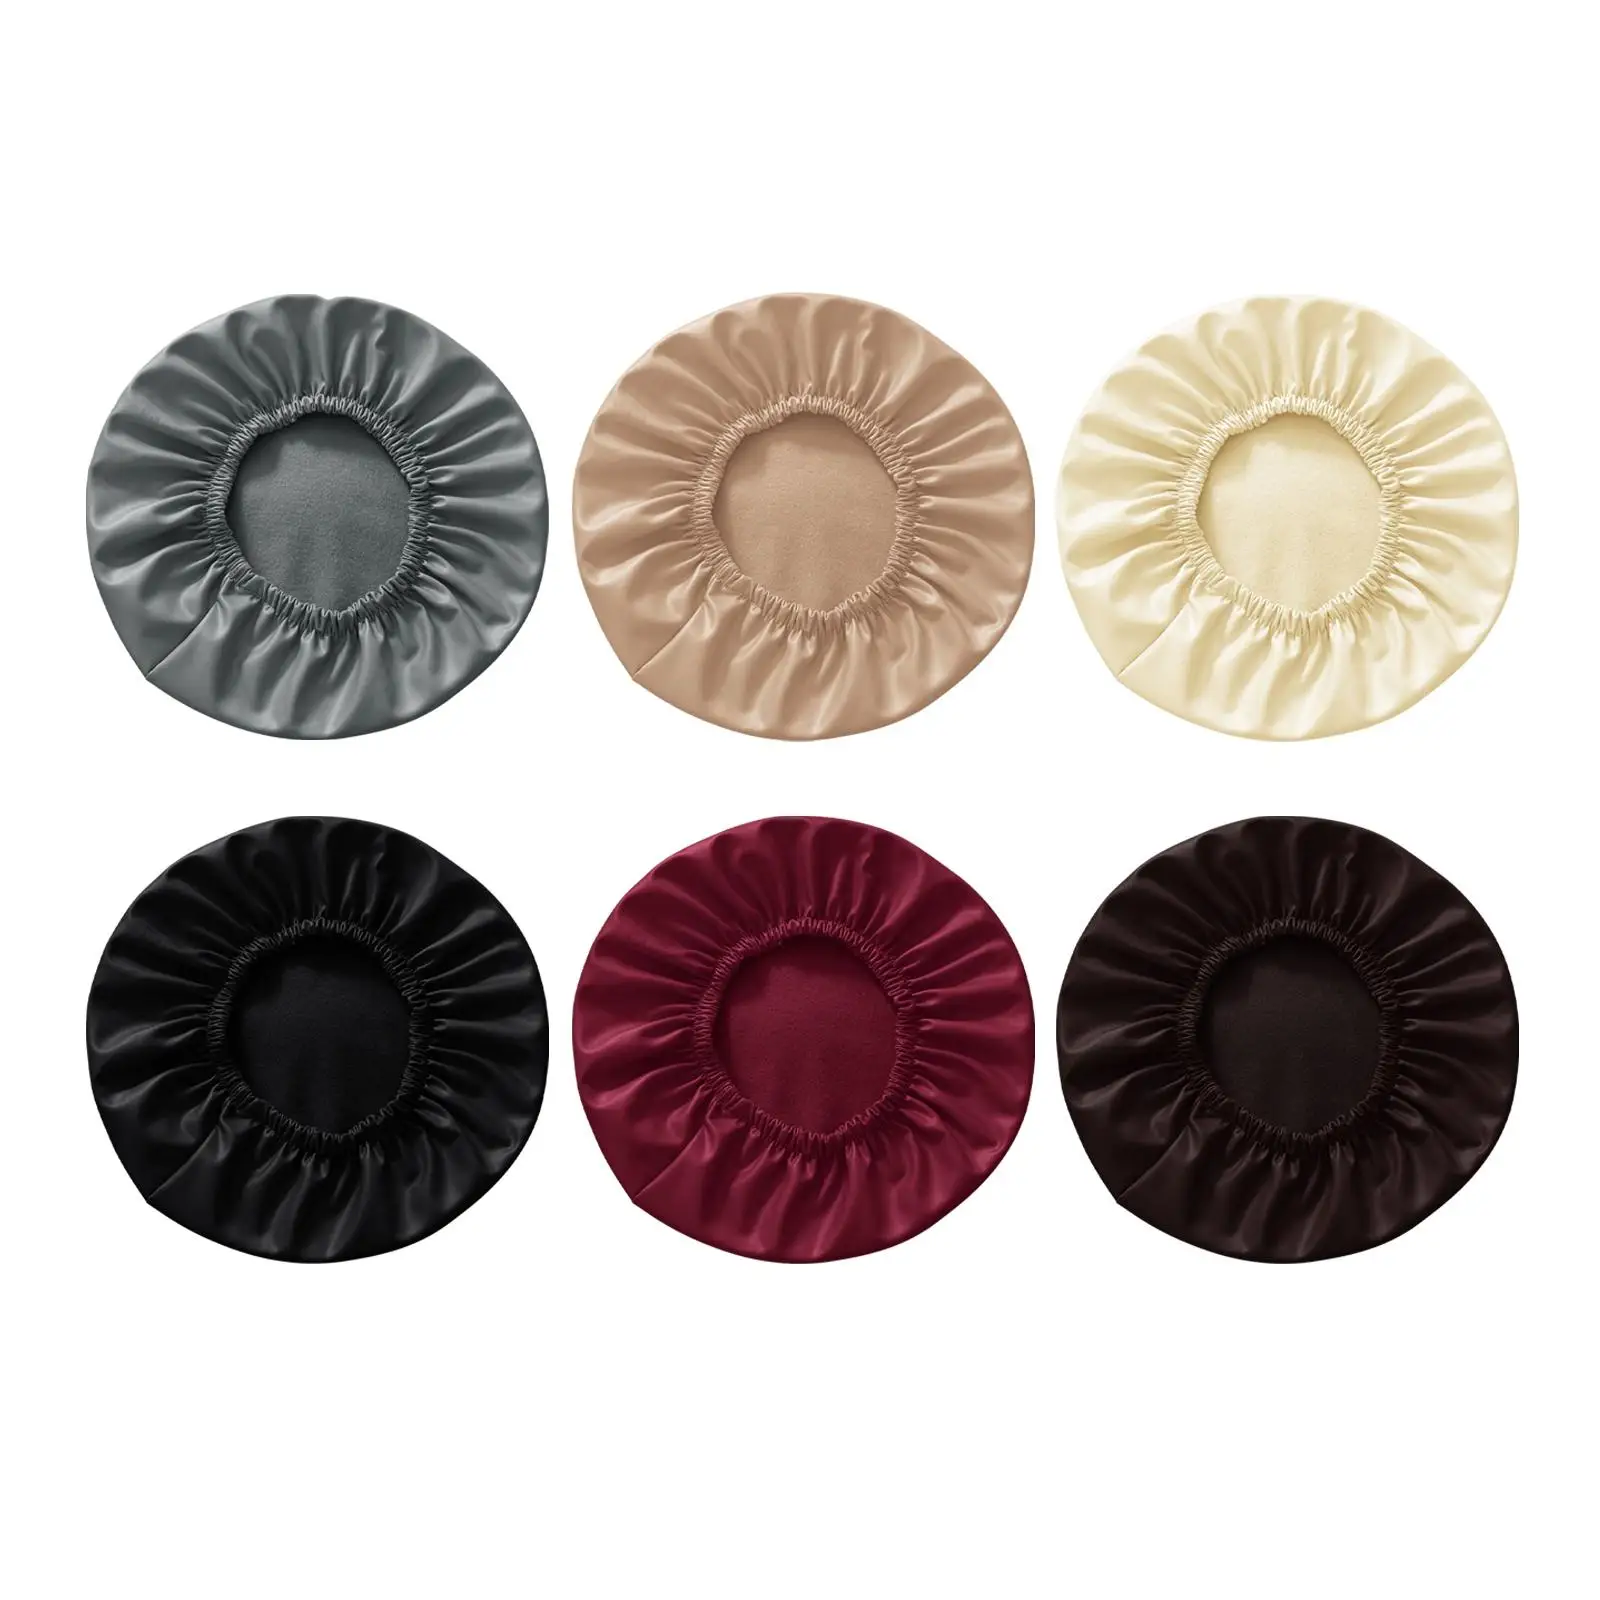 Round Stool Chair Cover PU Leather Seat Cover Chair Protector for Home Bar